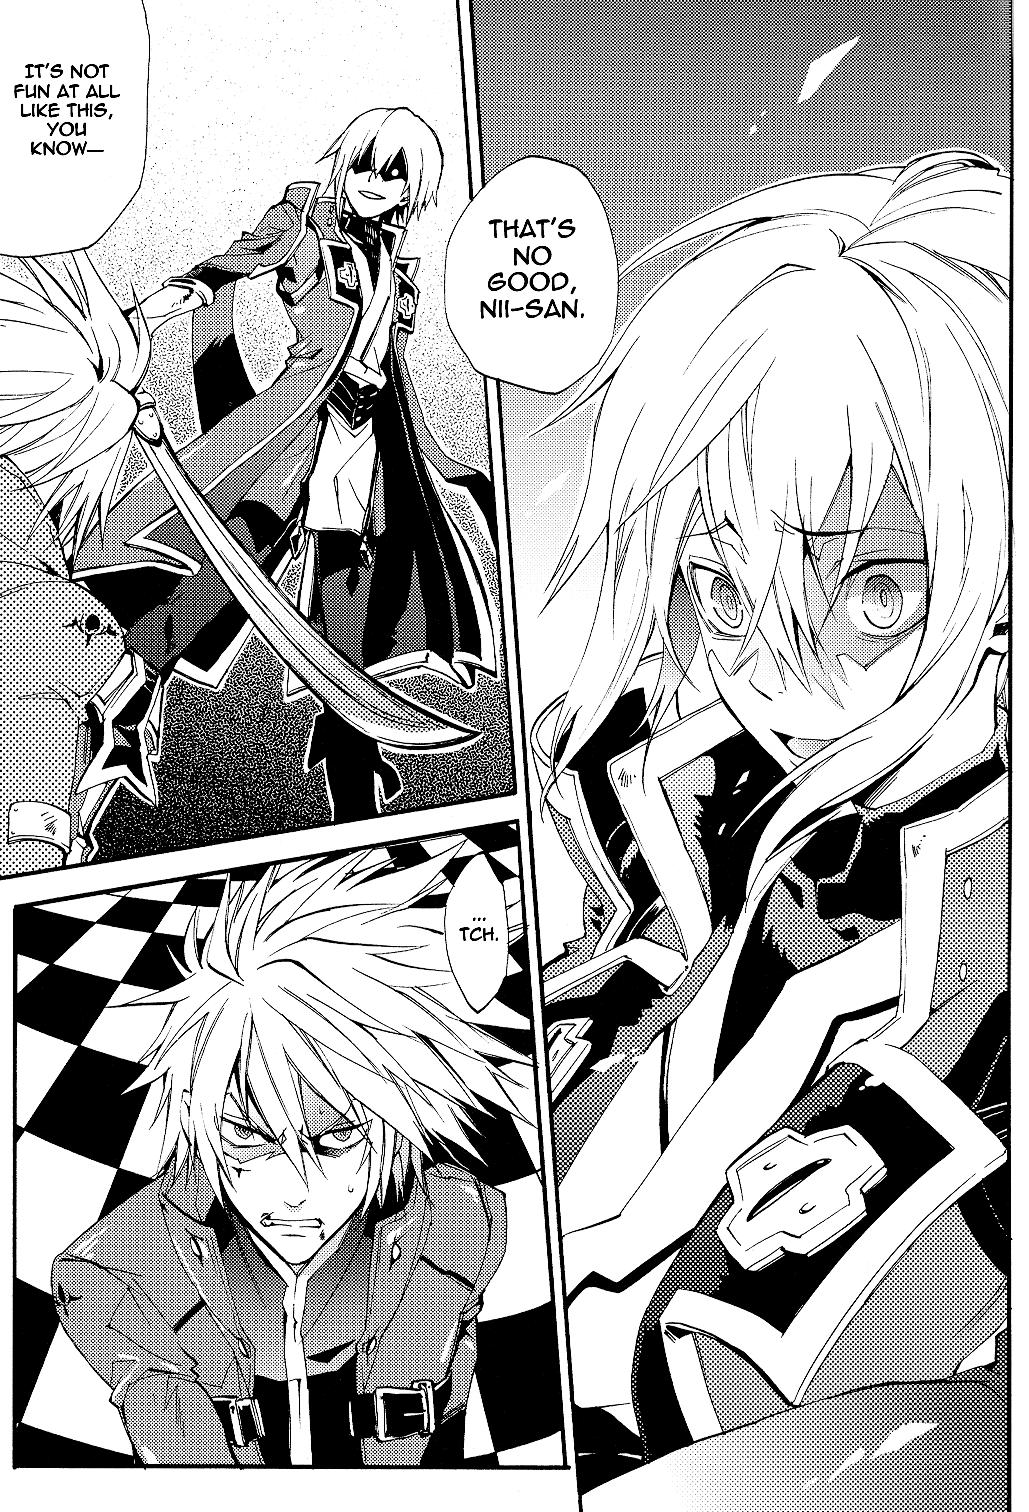 Amature Sex Tapes Ore no Yandere Otouto ga Konna ni Kawaii Wake ga Nai | My Yandere Little Brother Can’t Be This Cute - Blazblue Transsexual - Page 3